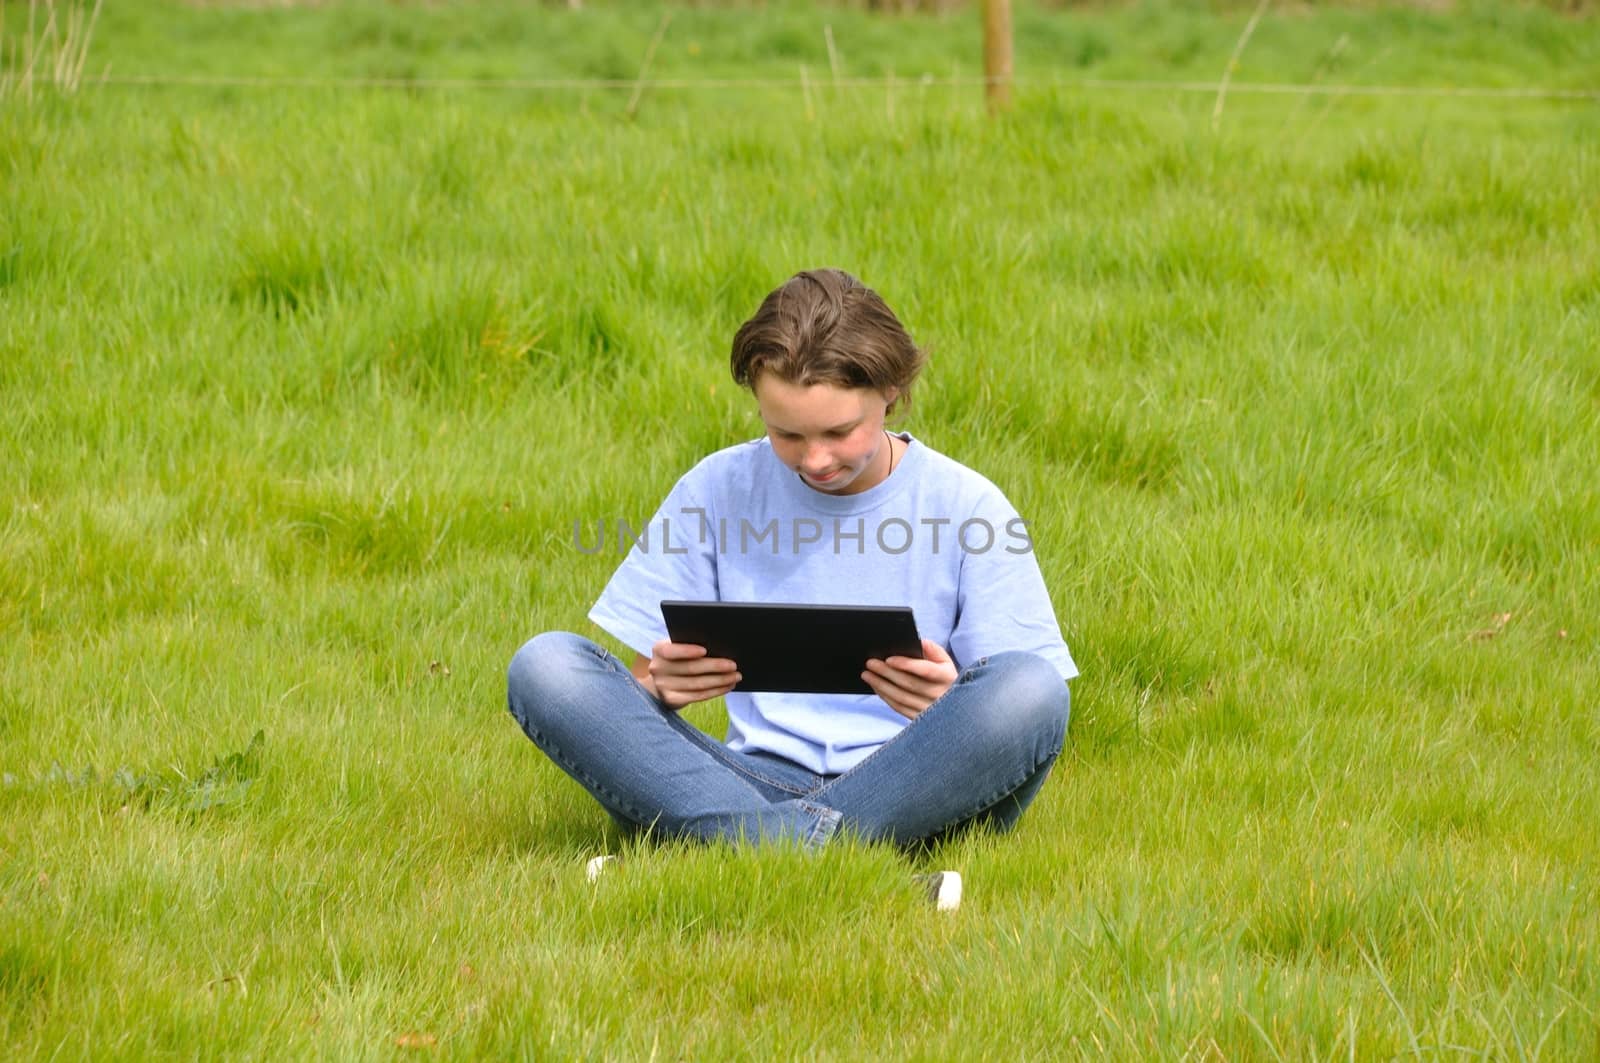 Girl sitting on the lawn and using digital tablet